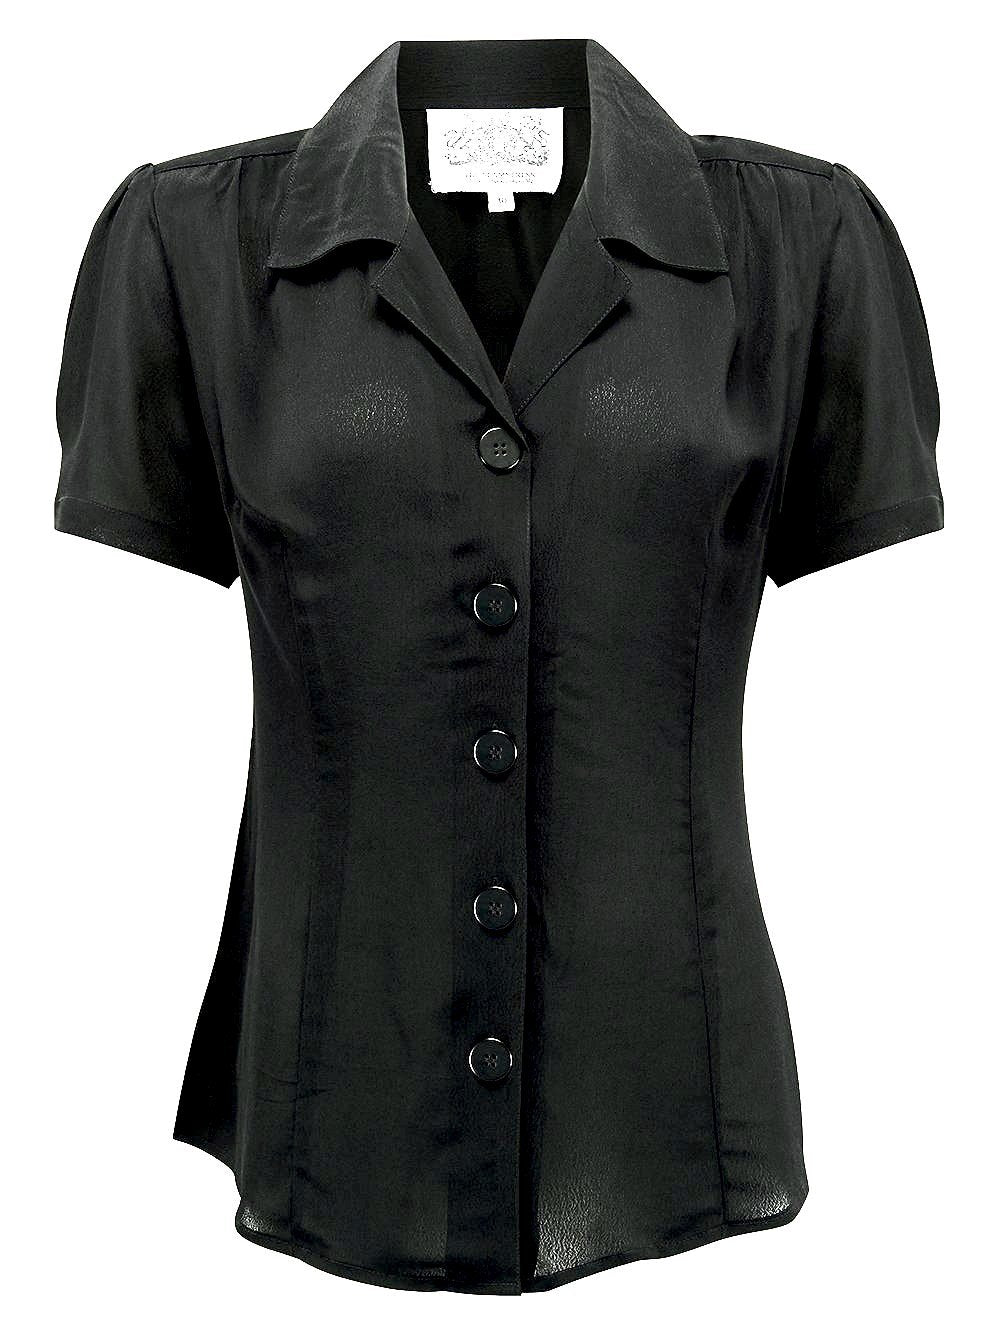 "Grace" Blouse in Black, Classic 1940s Vintage Style - True and authentic vintage style clothing, inspired by the Classic styles of CC41 , WW2 and the fun 1950s RocknRoll era, for everyday wear plus events like Goodwood Revival, Twinwood Festival and Viva Las Vegas Rockabilly Weekend Rock n Romance The Seamstress Of Bloomsbury